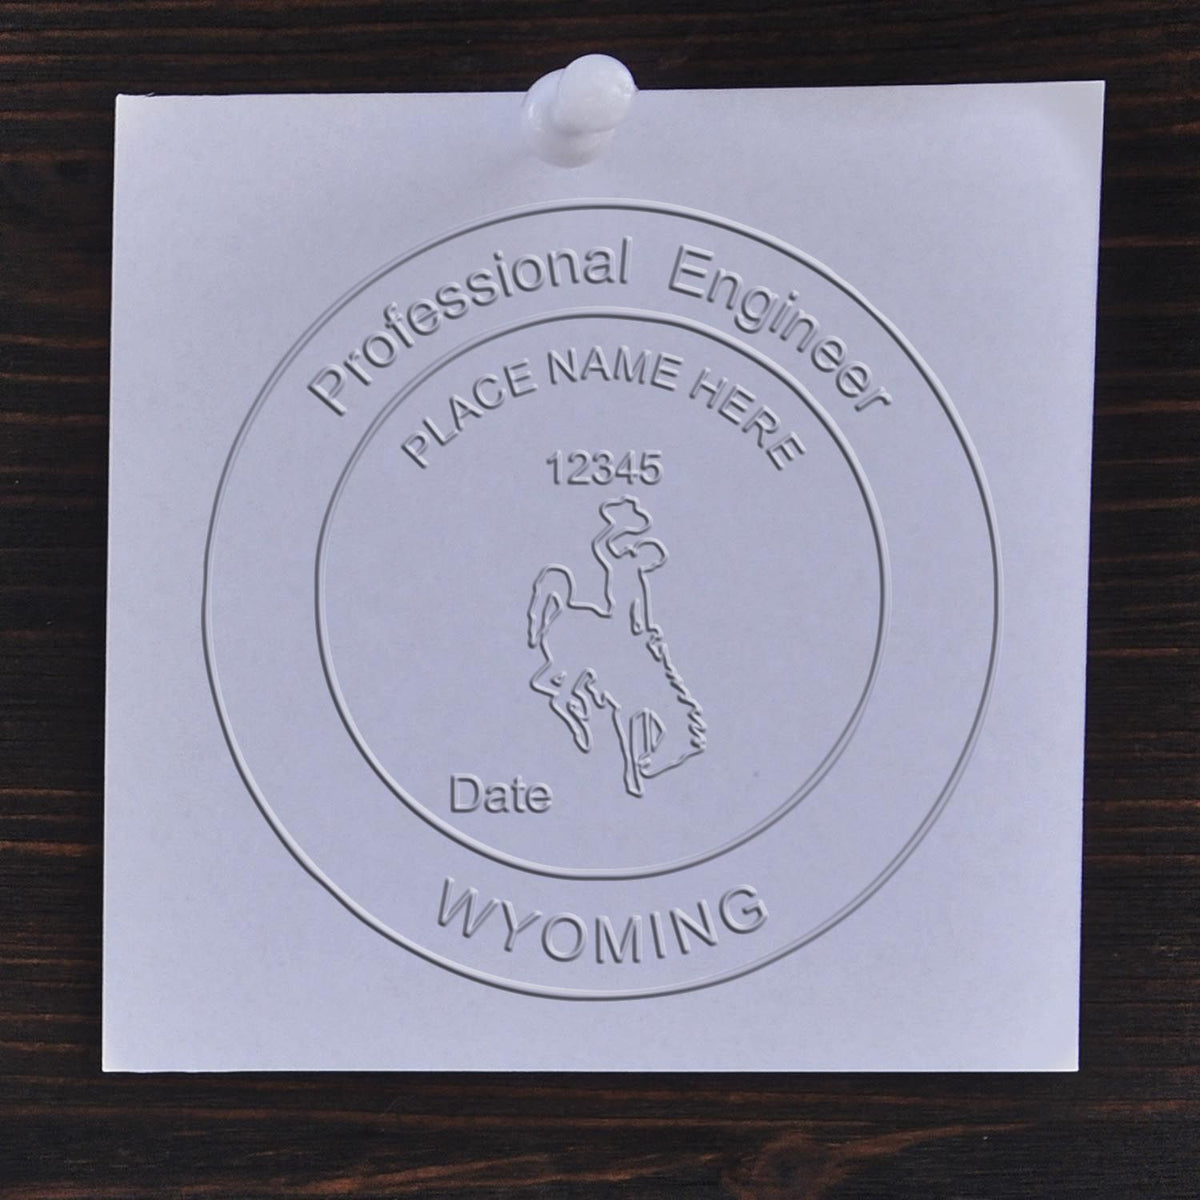 An in use photo of the Hybrid Wyoming Engineer Seal showing a sample imprint on a cardstock